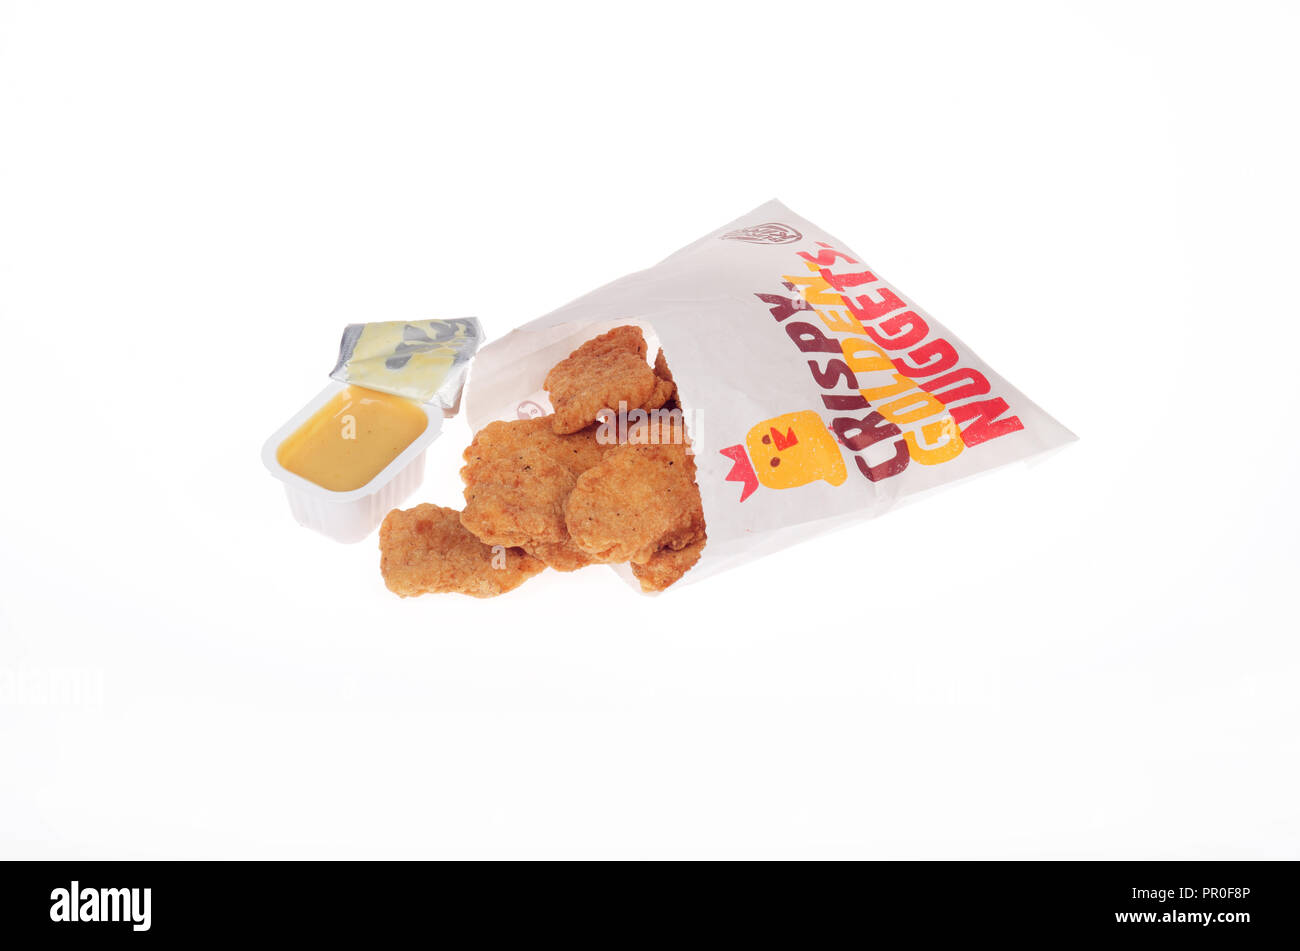 Burger King Chicken Nuggets with honey mustard dipping sauce Stock Photo